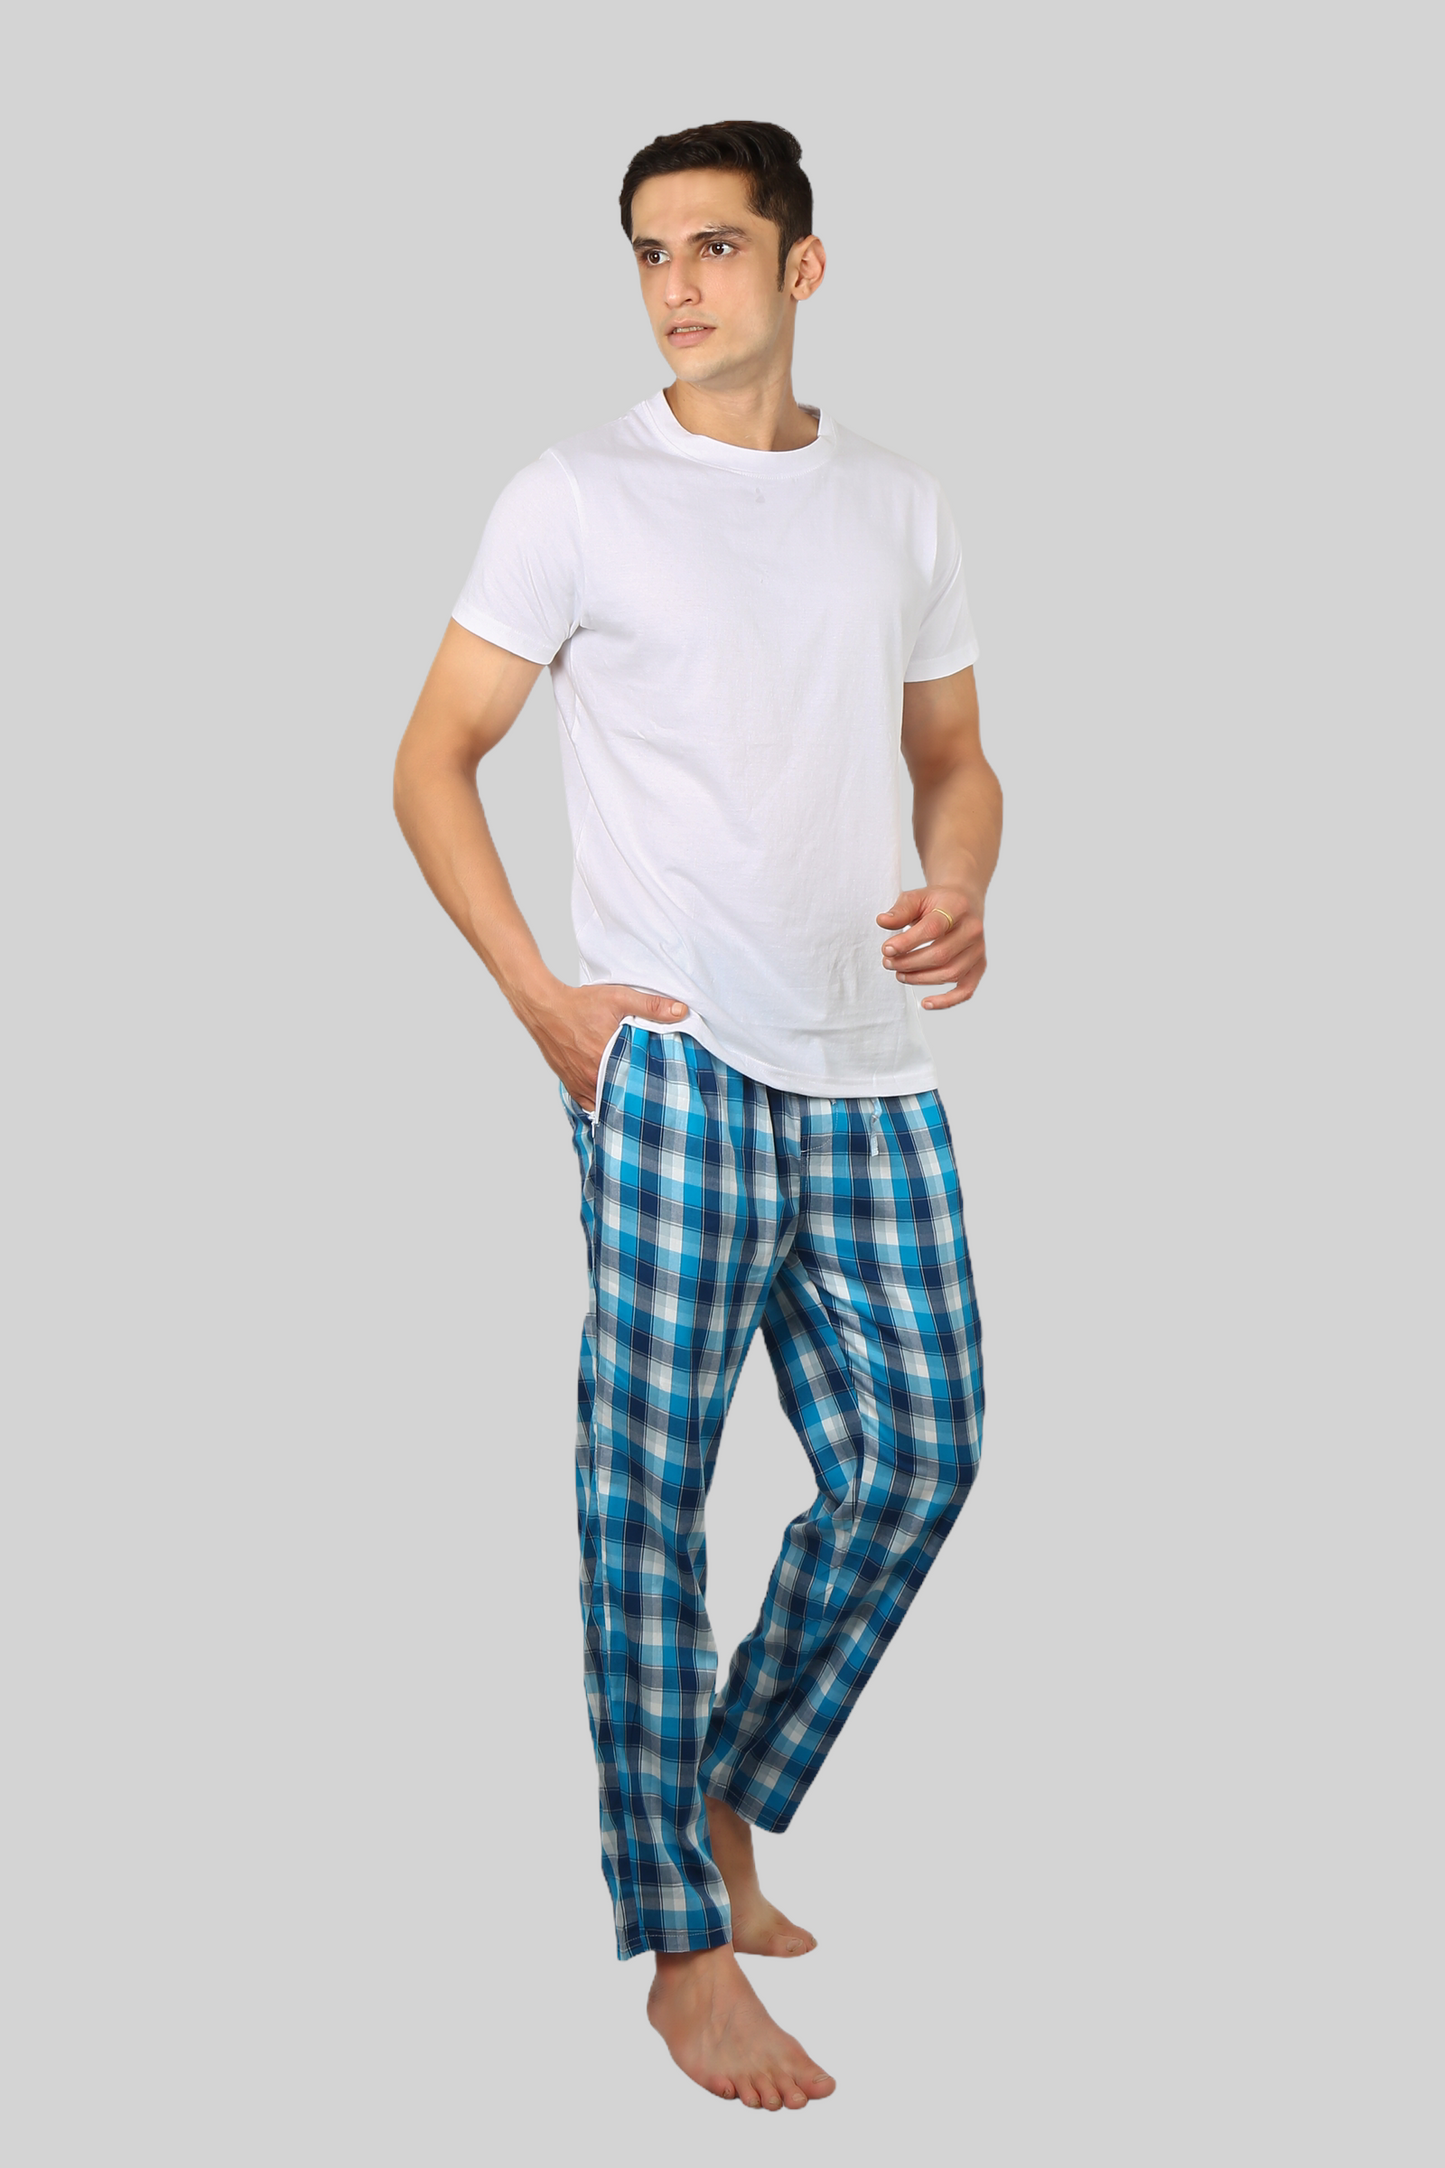 Steel Blue soft and super comfortable checkered pajamas for men